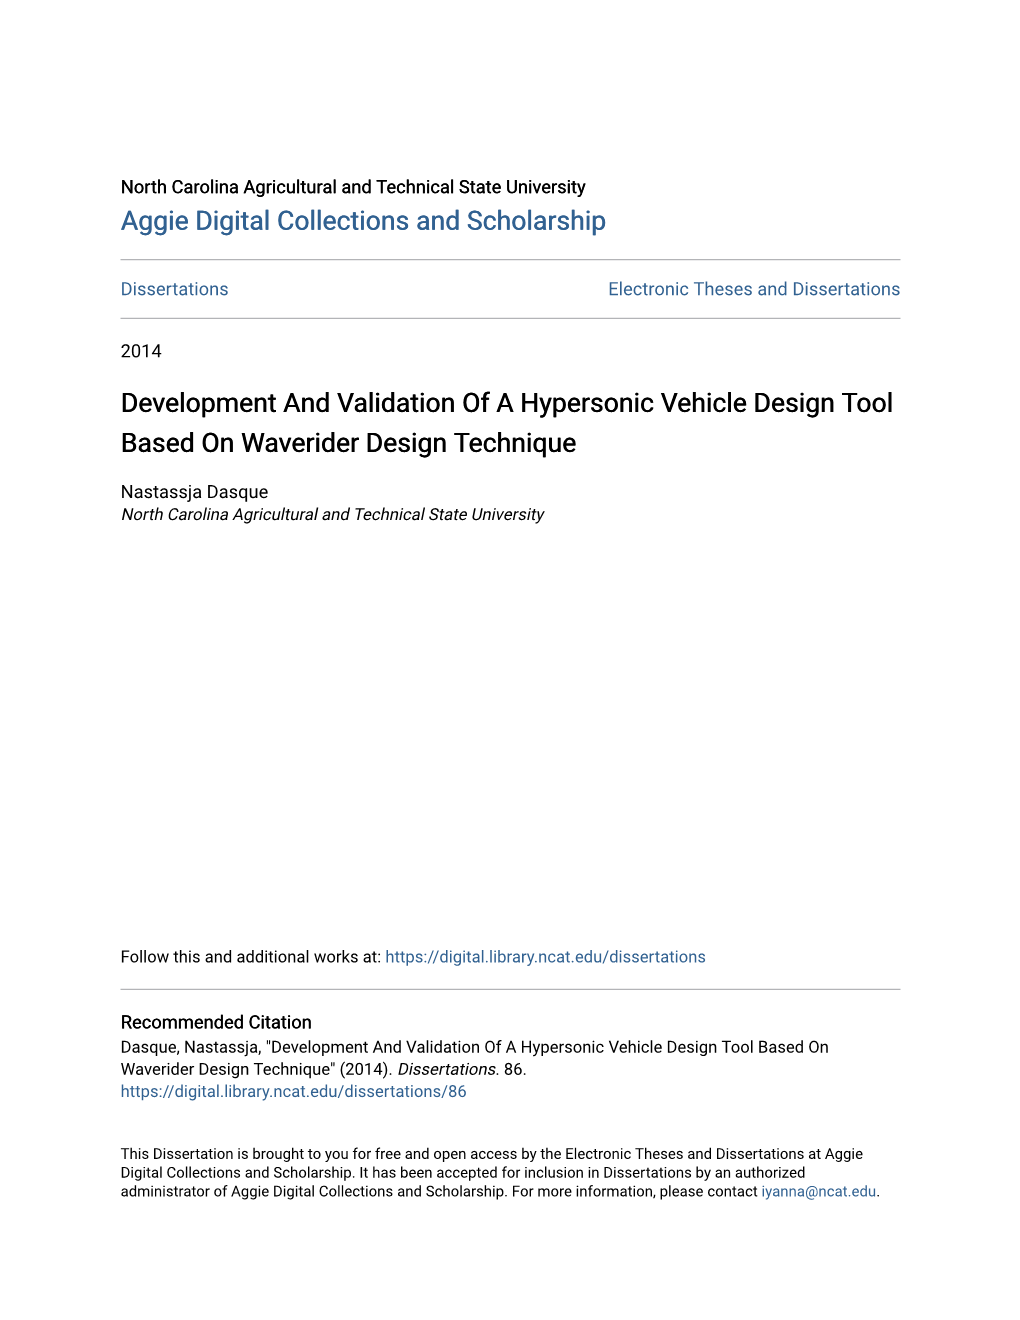 Development and Validation of a Hypersonic Vehicle Design Tool Based on Waverider Design Technique